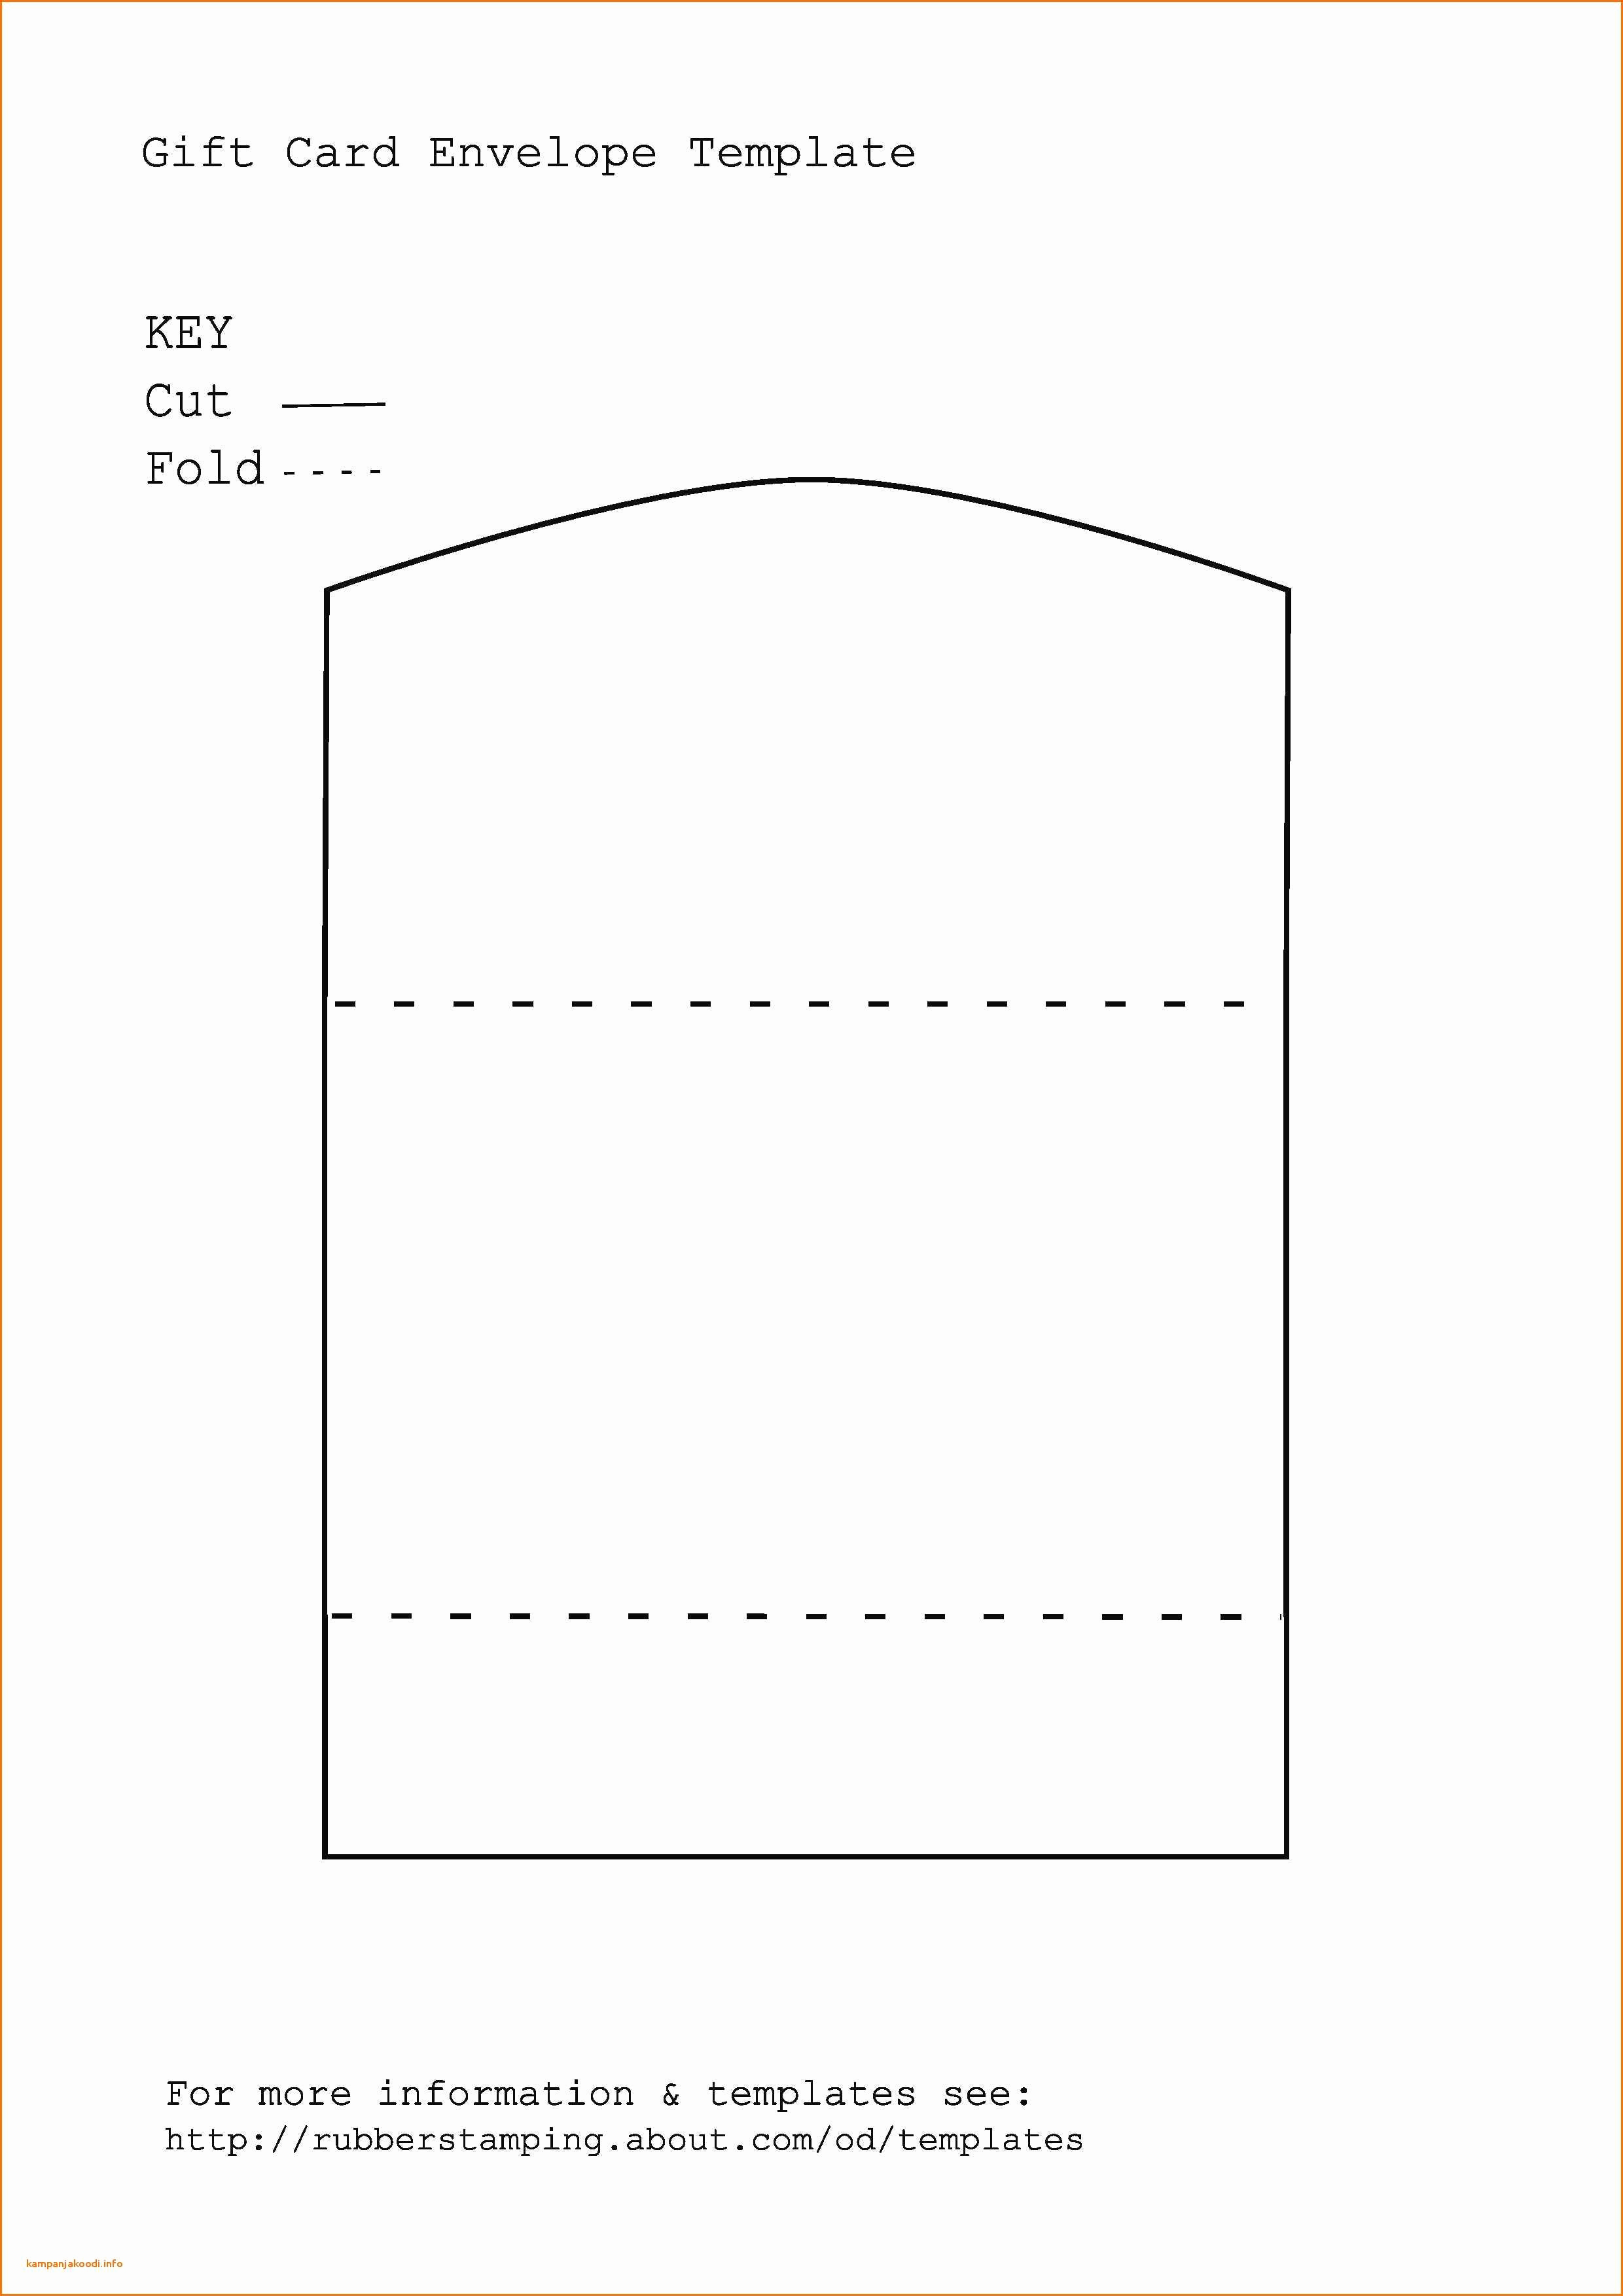 9 Lovely Image Of Tent Card Template 6 Per Sheet | News Pertaining To Place Card Template 6 Per Sheet